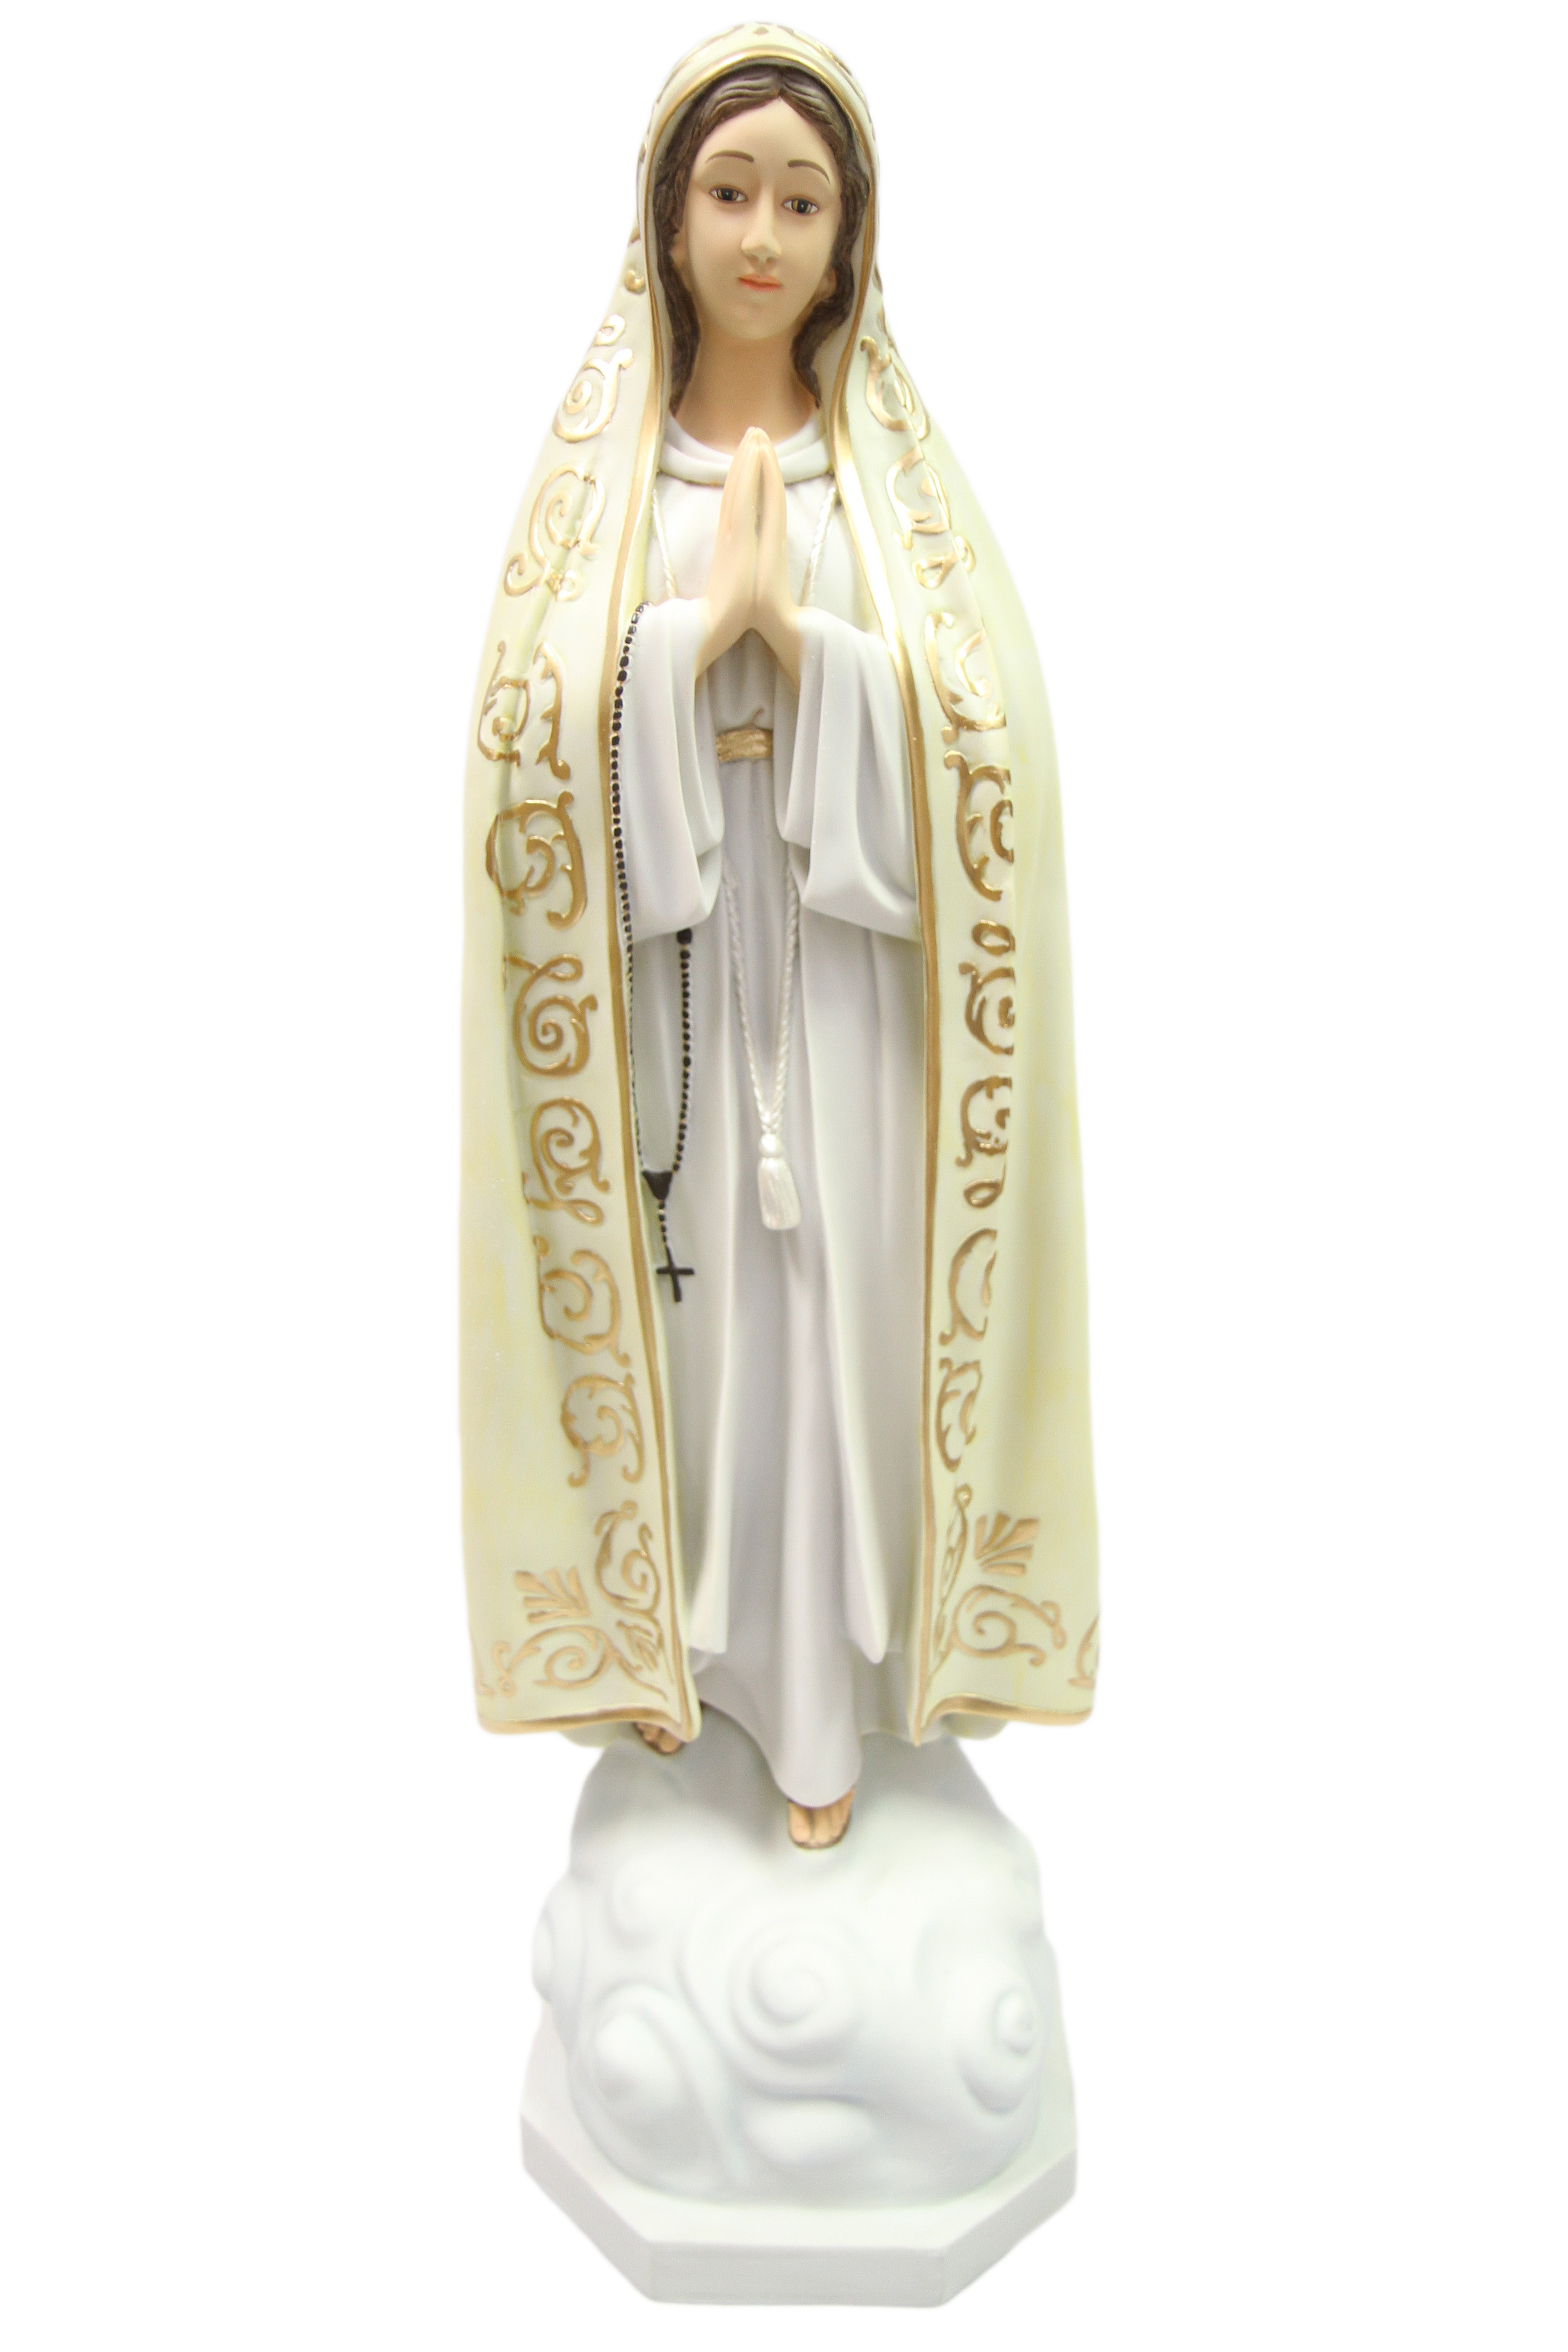 32 Inch Our Lady of Fatima Virgin Mary Mother Catholic Religious Statue Vittoria Collection